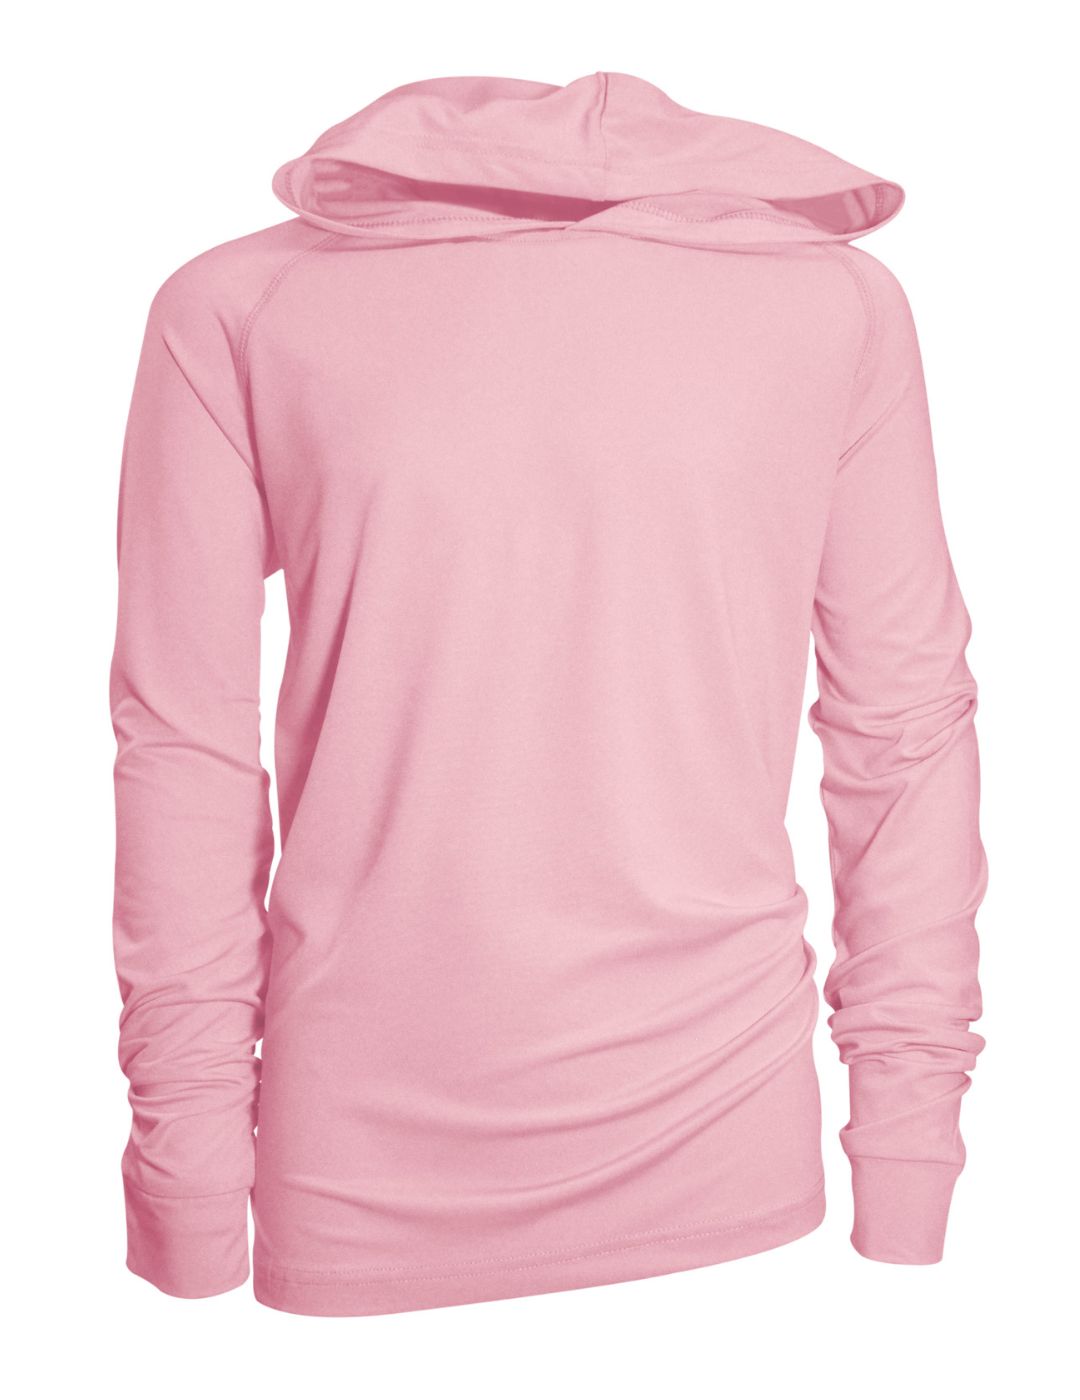 Marley Youth Girls' Hooded Sunshirt Pink / Small (Ages: 5-6)